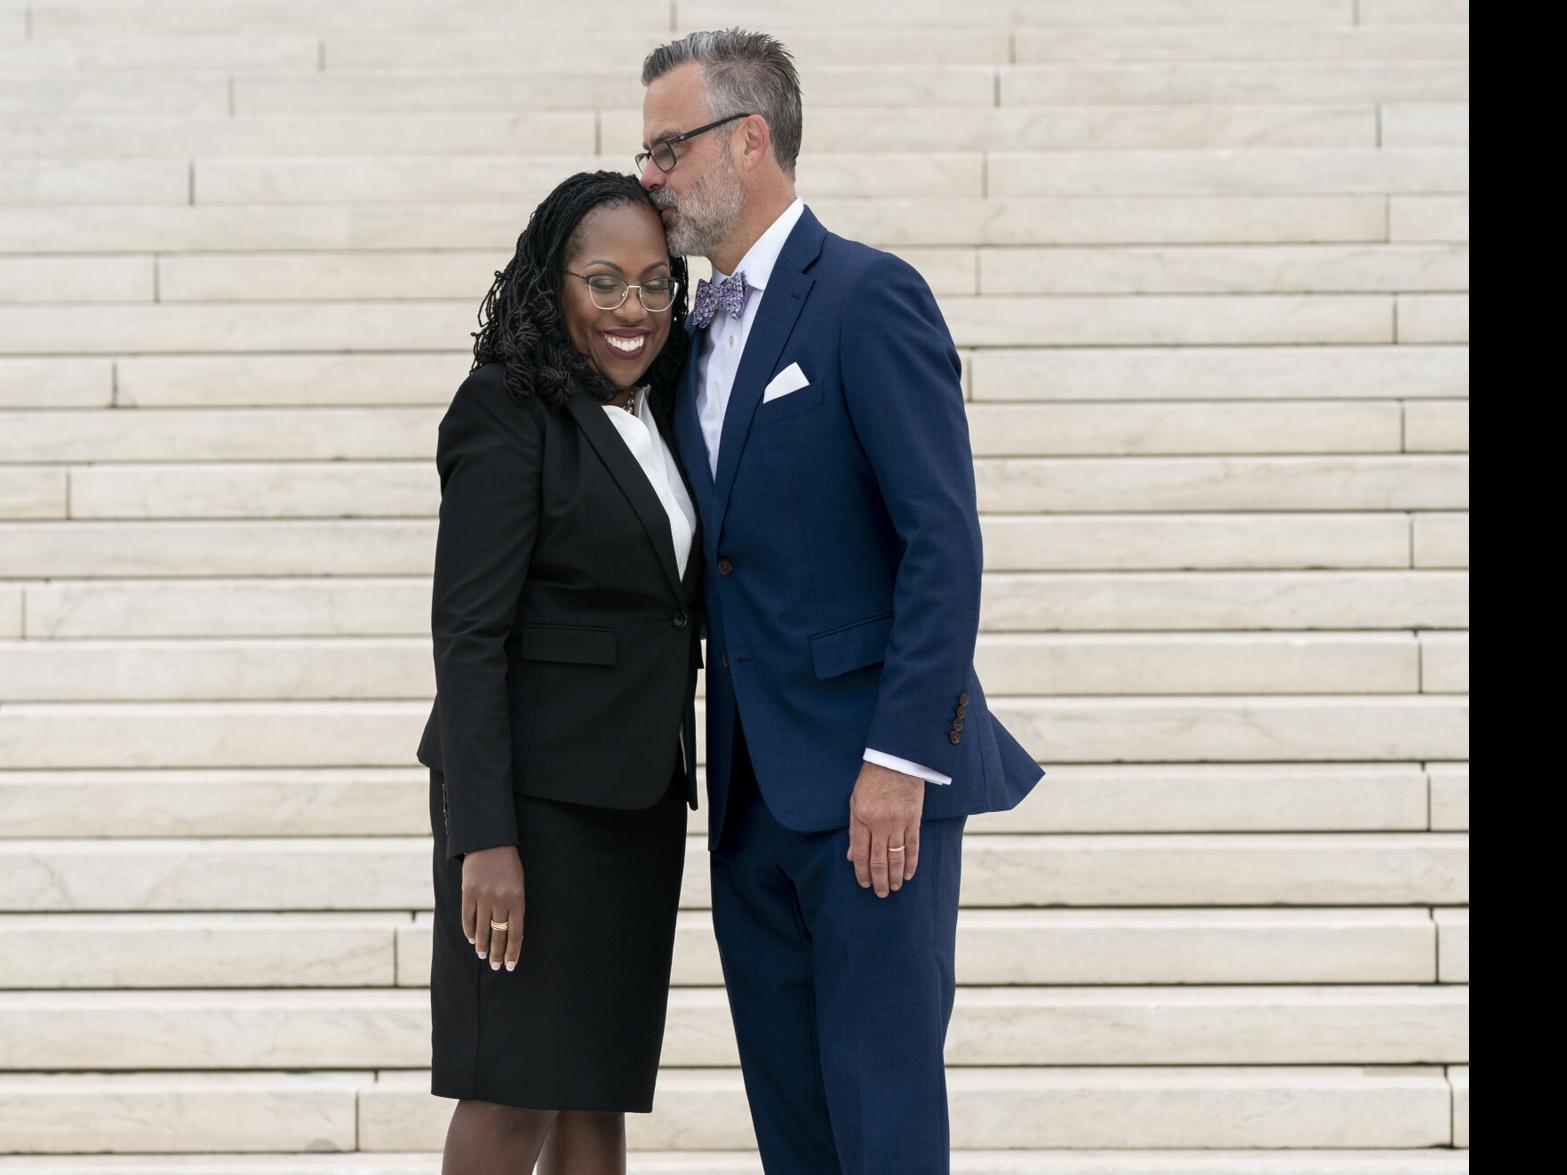 Justice Jackson makes Supreme Court debut in brief ceremony - The